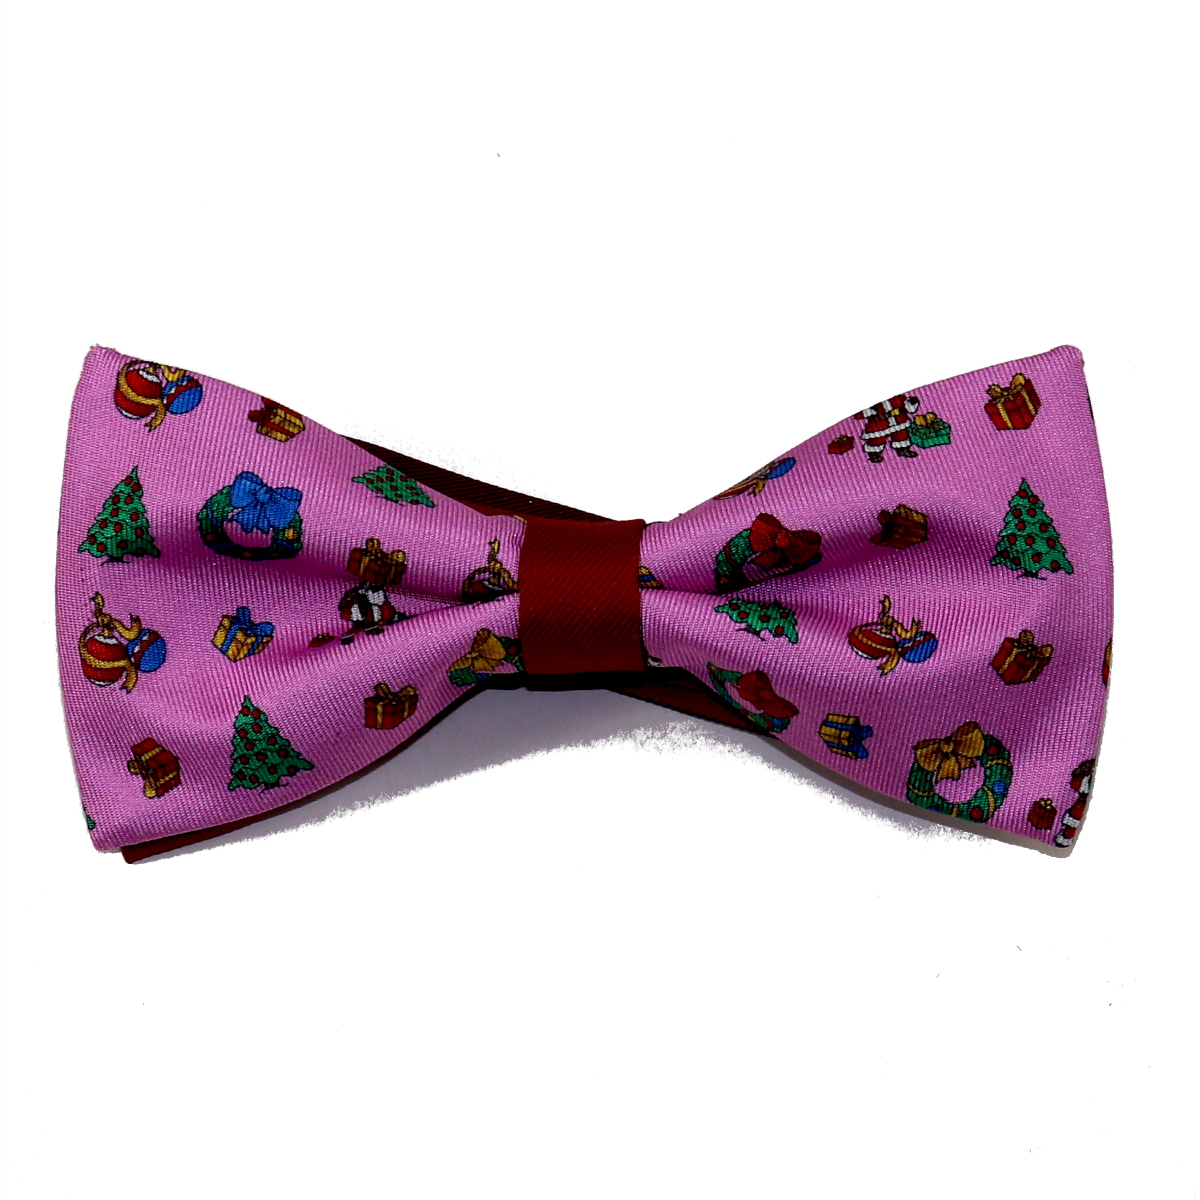 Sartorial pink twill silk bow tie with multicolored Christmas